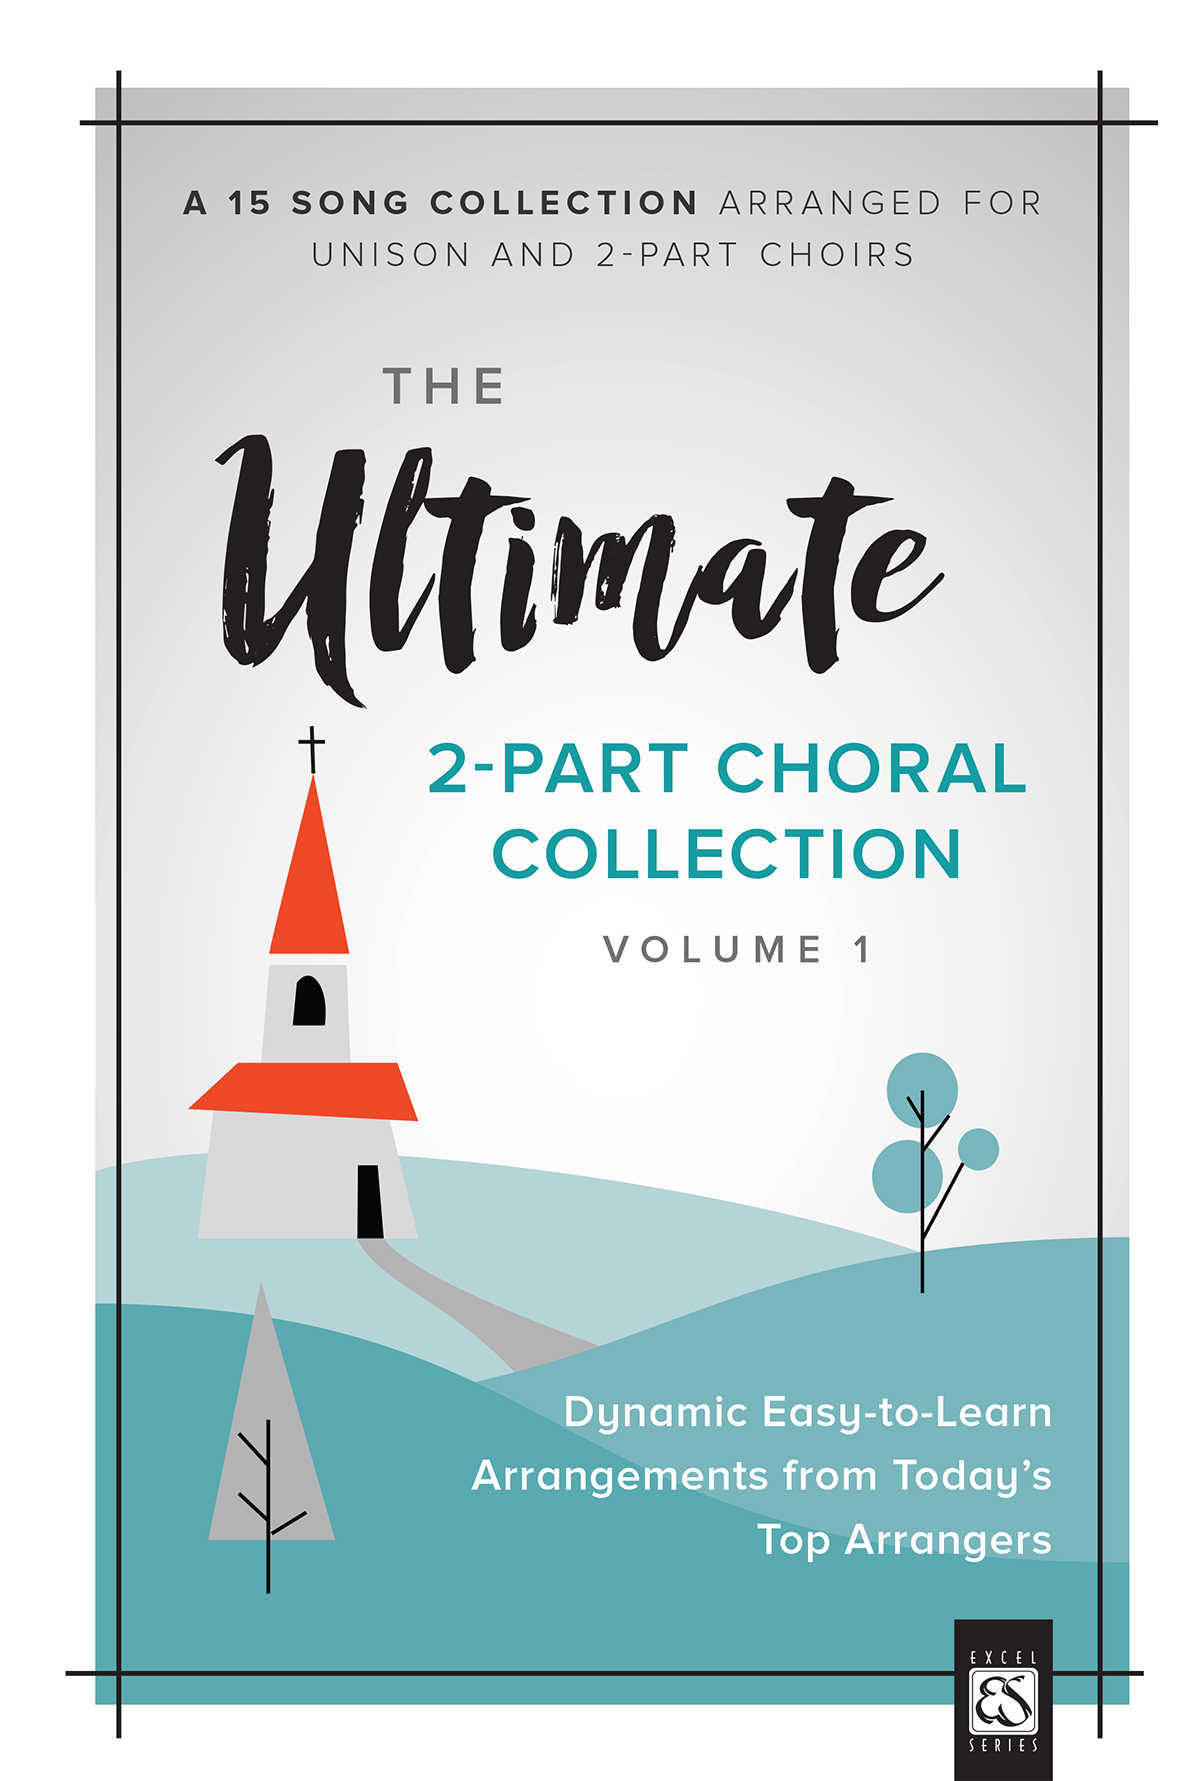 The Ultimate 2-Part Choral Collection Volume 1